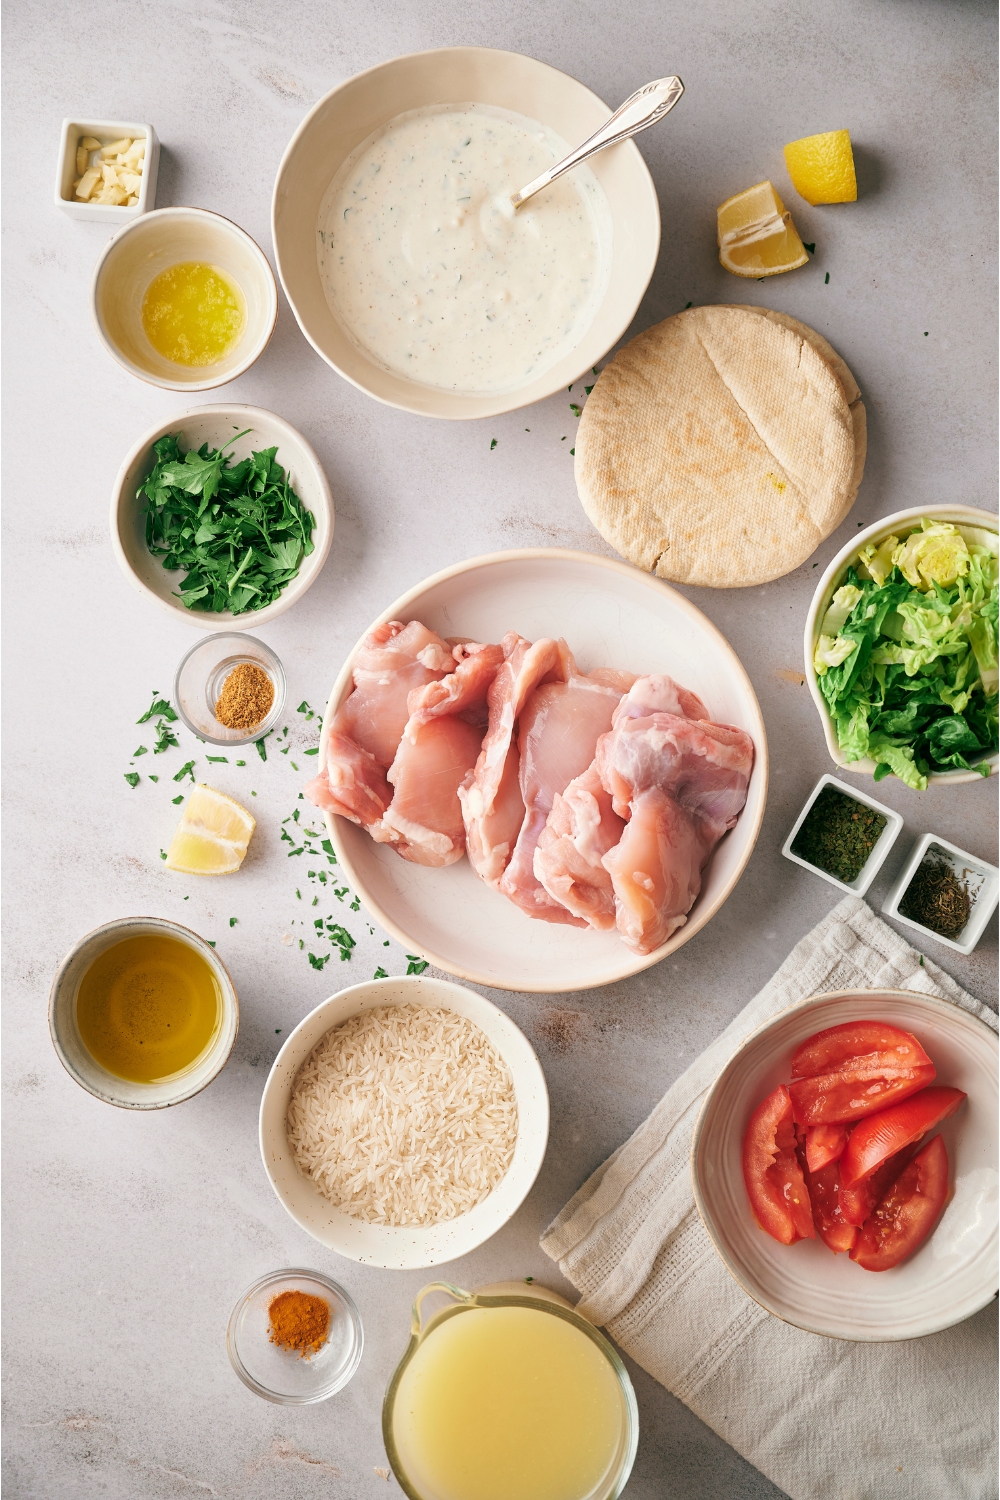 An assortment of ingredients for halal chicken over rice including bowls of raw chicken, white sauce, tomatoes, uncooked rice, broth, parsley, and pita bread.